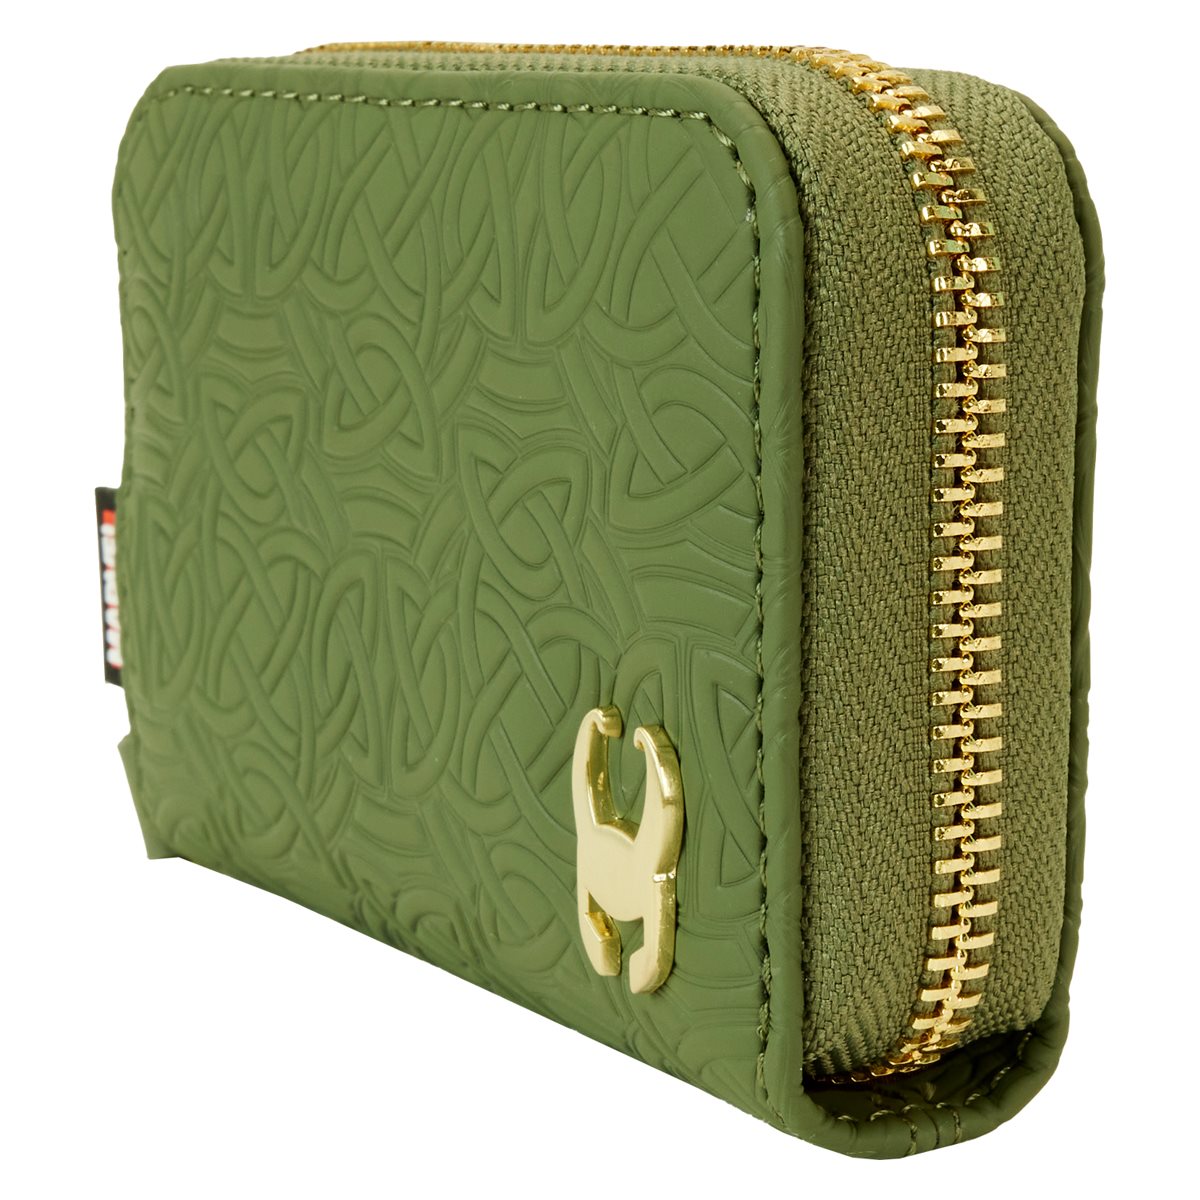 NEW Epic Loungefly Loki Collection Now Available Online - MickeyBlog.com